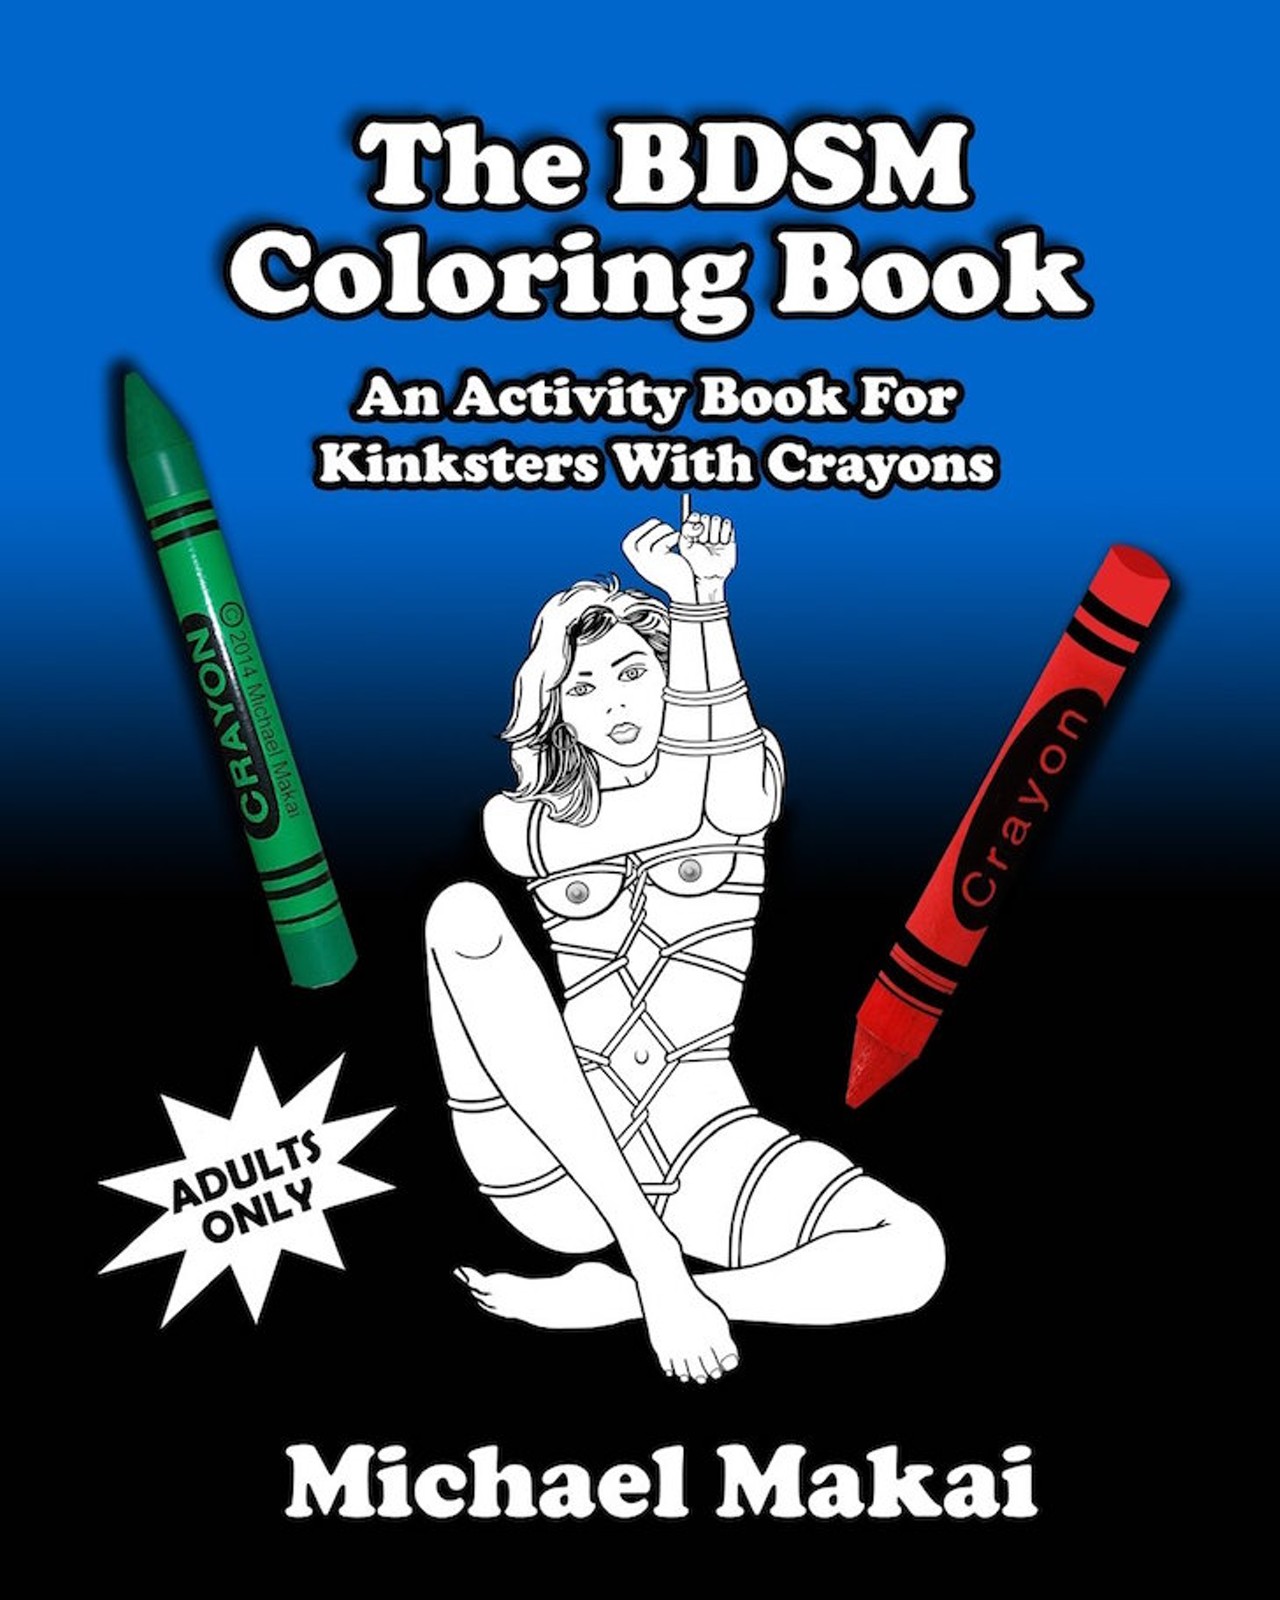  The BDSM Coloring Book: An Activity Book for Kinksters With Crayons
;)
Buy it at amazon.com 